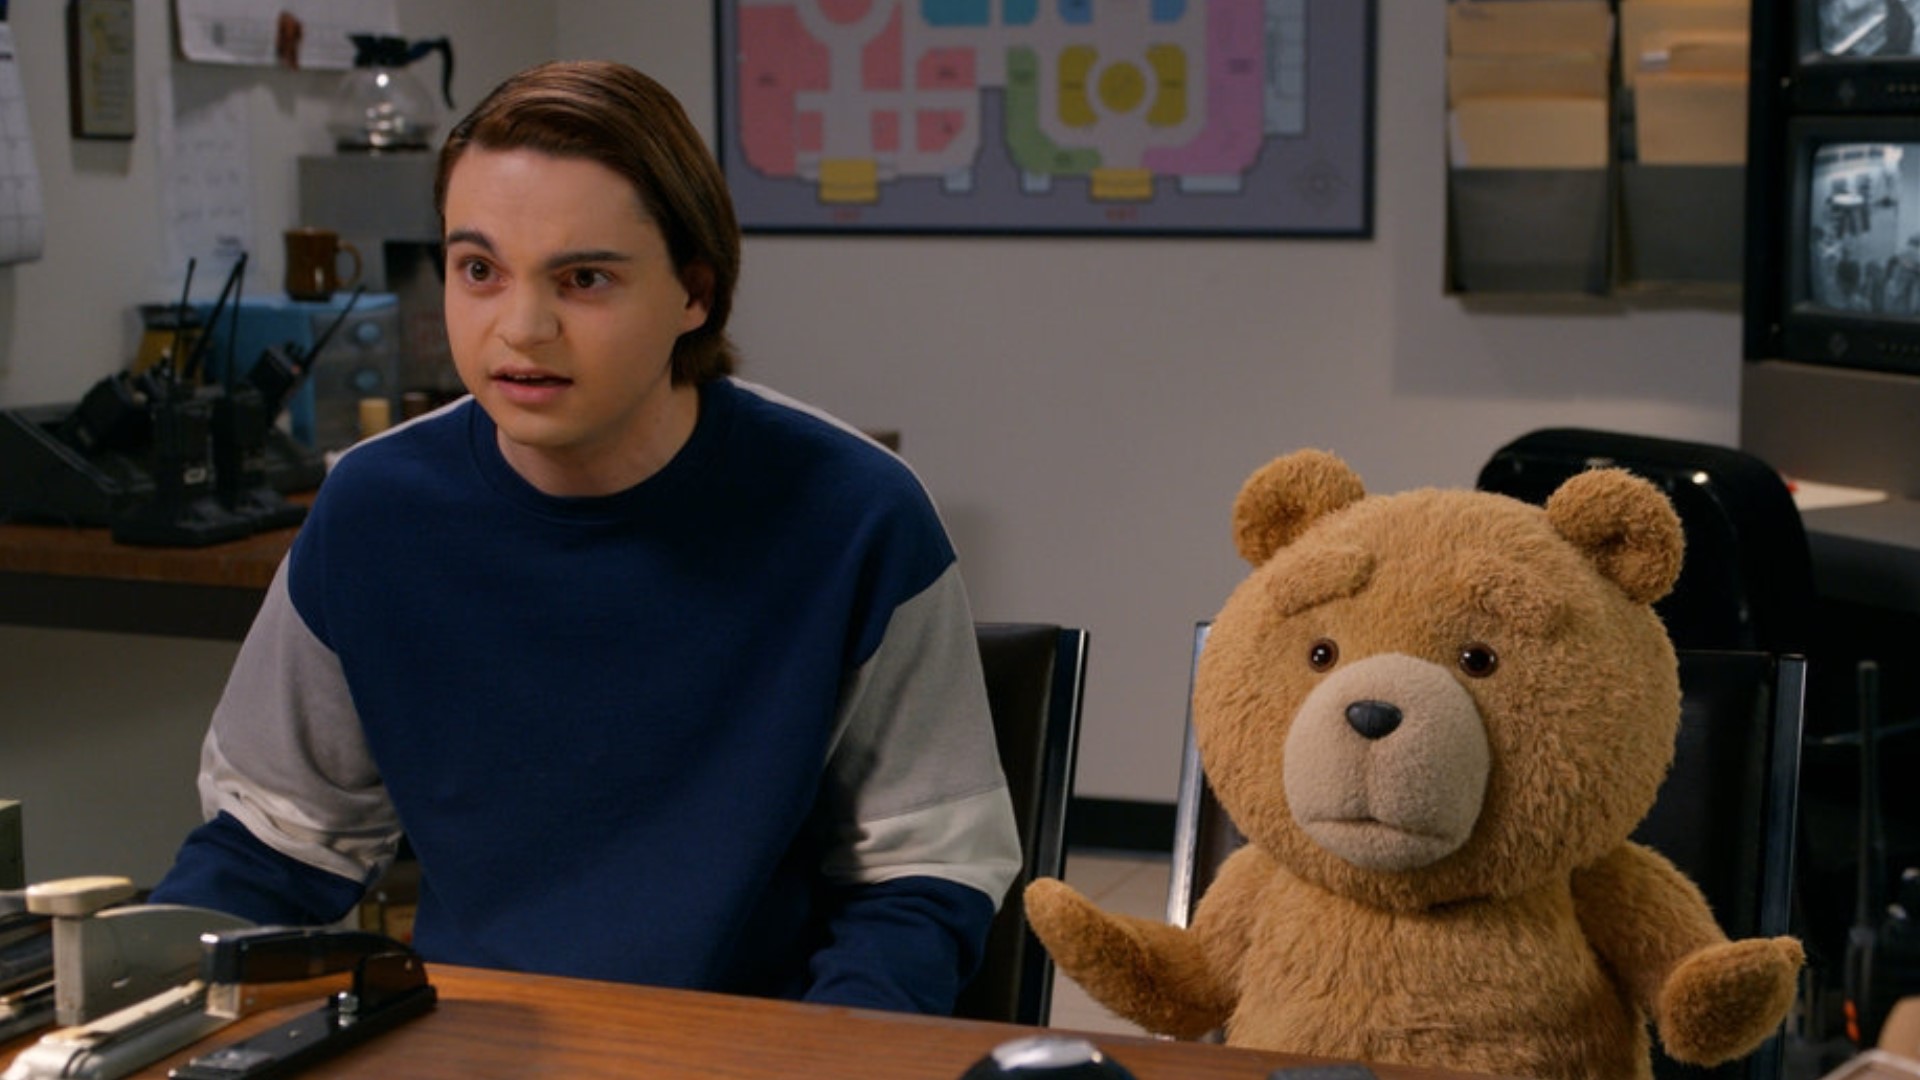 All seven episodes of "Ted" begin streaming on Peacock Thursday, Jan. 11.